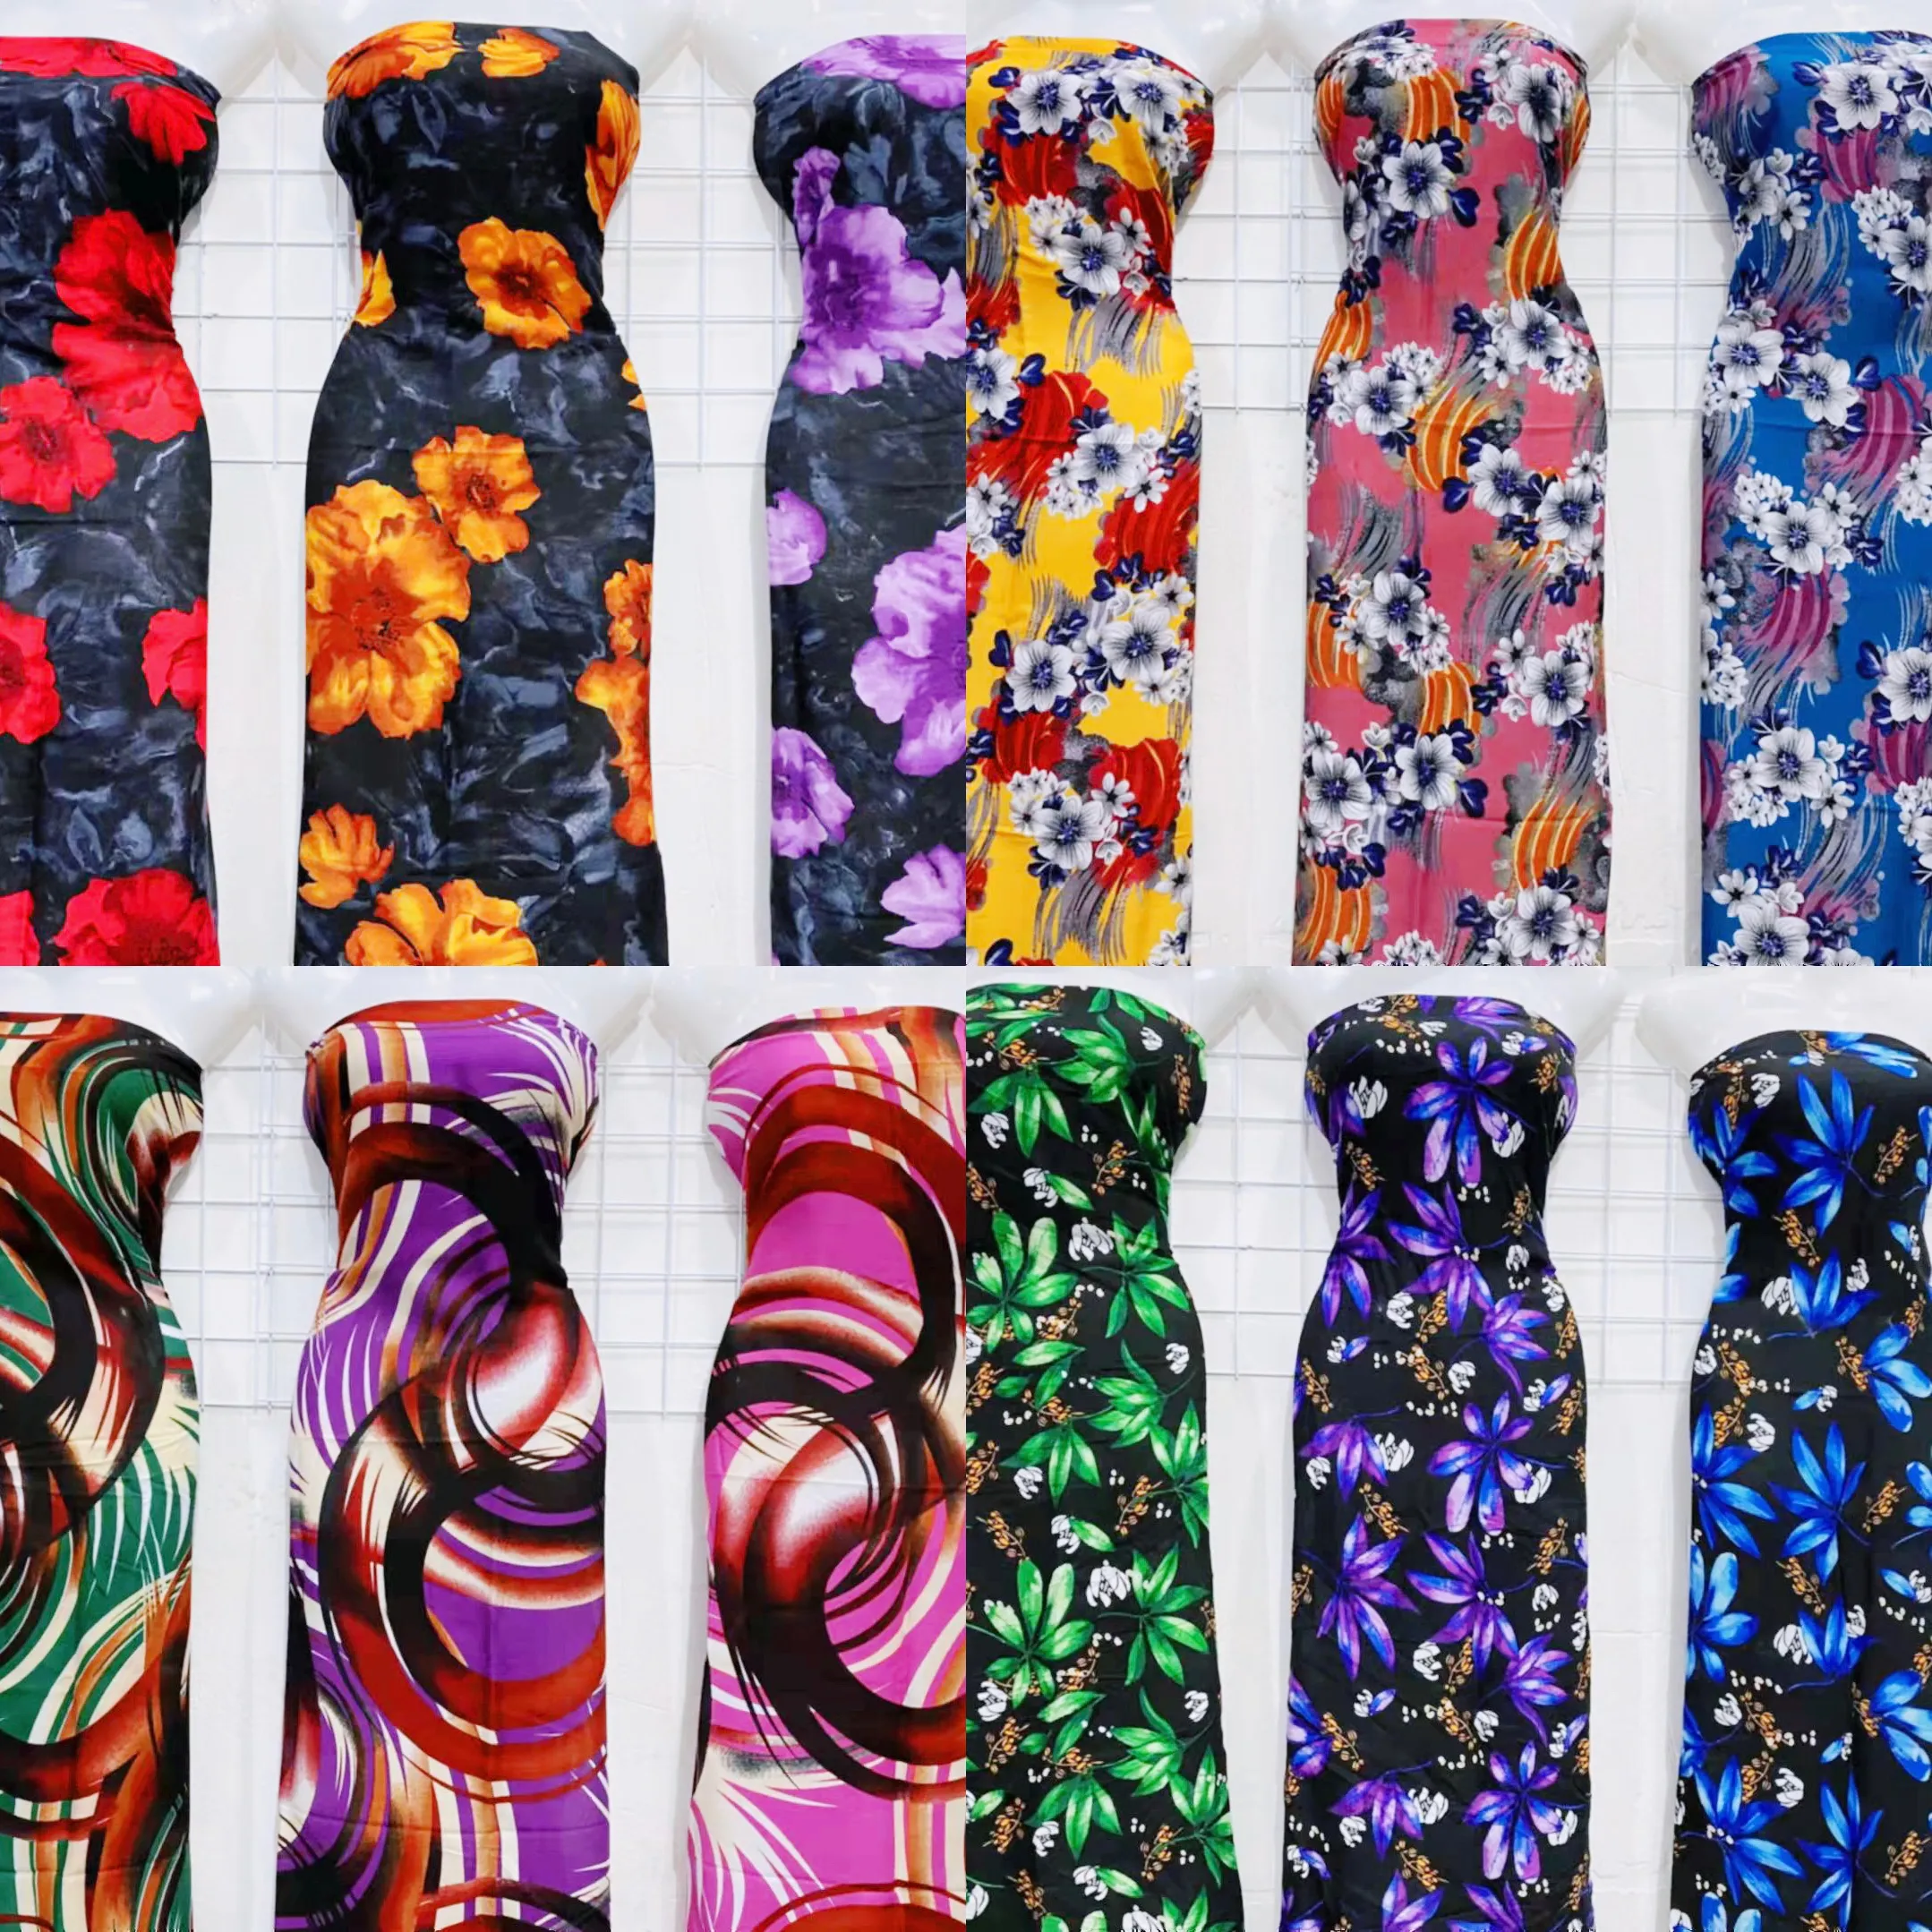 Factory price Ready goods Manufacturer digital printing rayon fabric 100% viscose fabric for dress